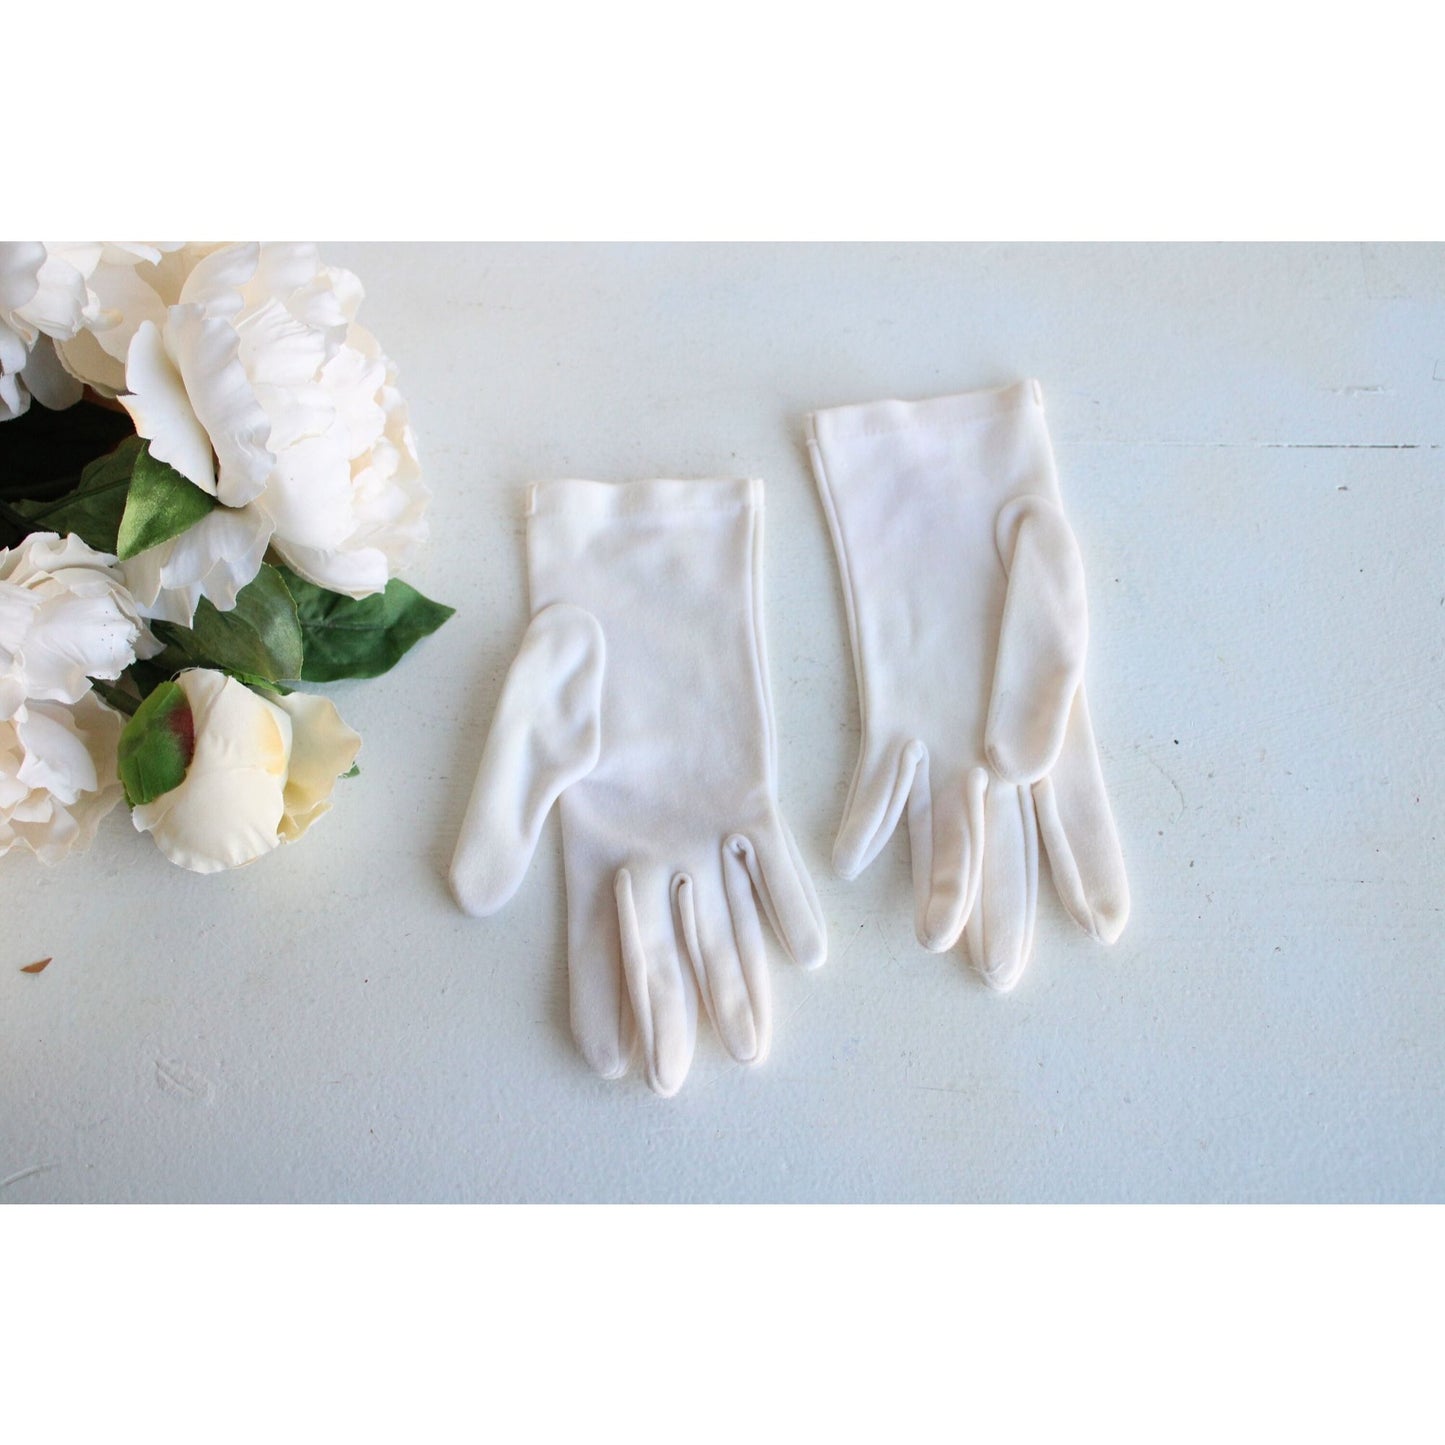 Vintage 1960s Gloves With Bows